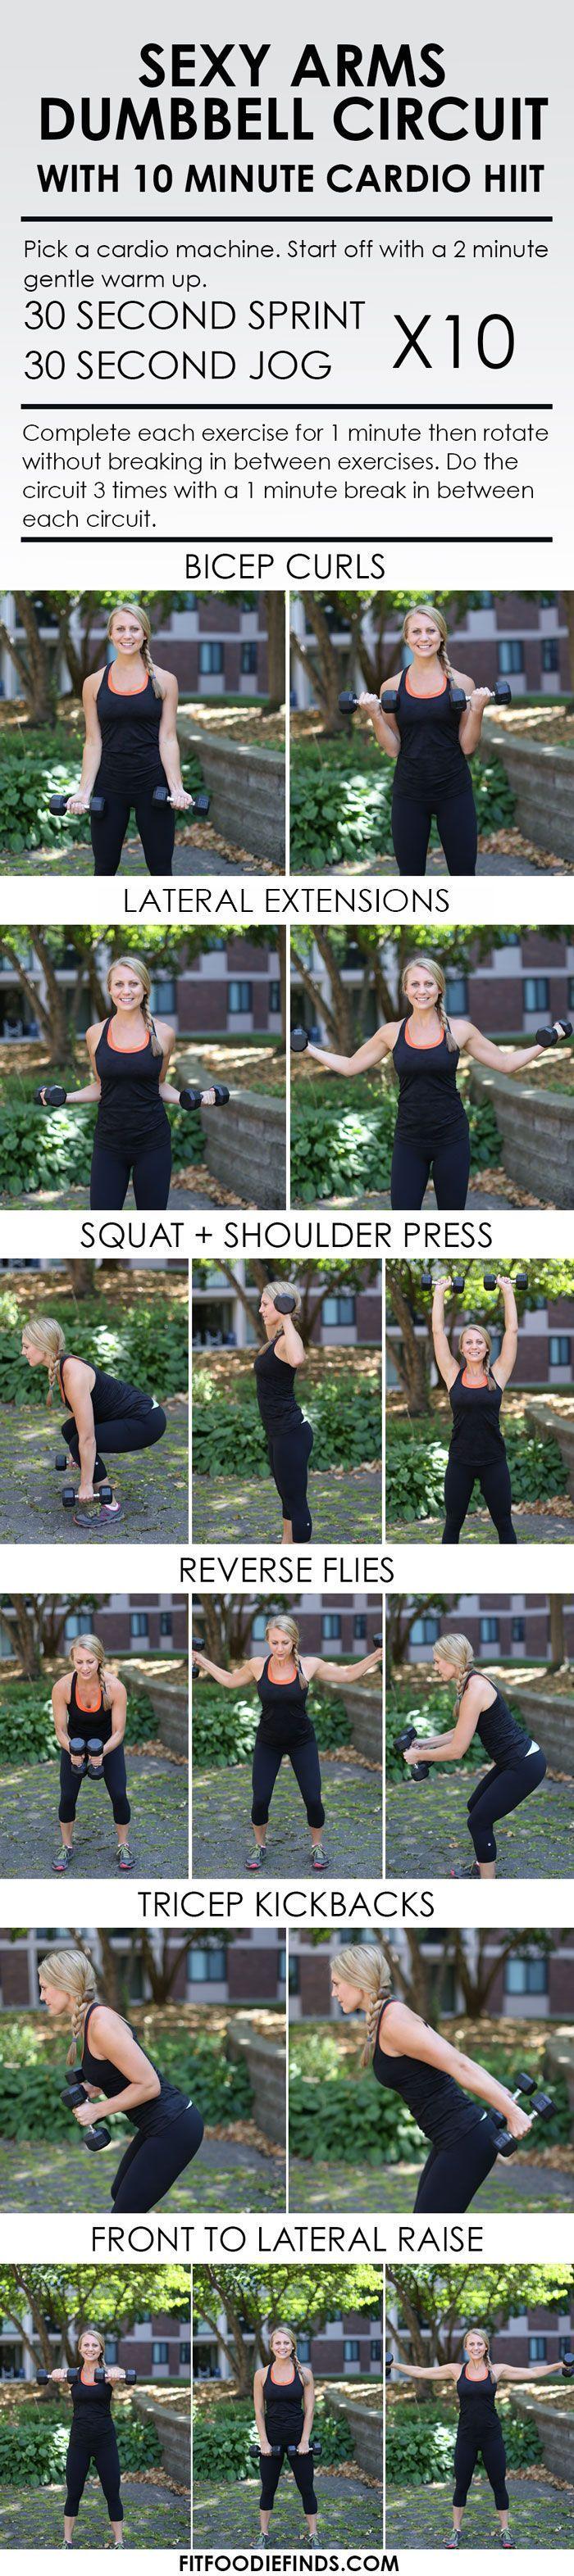 Wedding - Sexy Arms Dumbbell Circuit Workout With 10 Minute Cardio HIIT